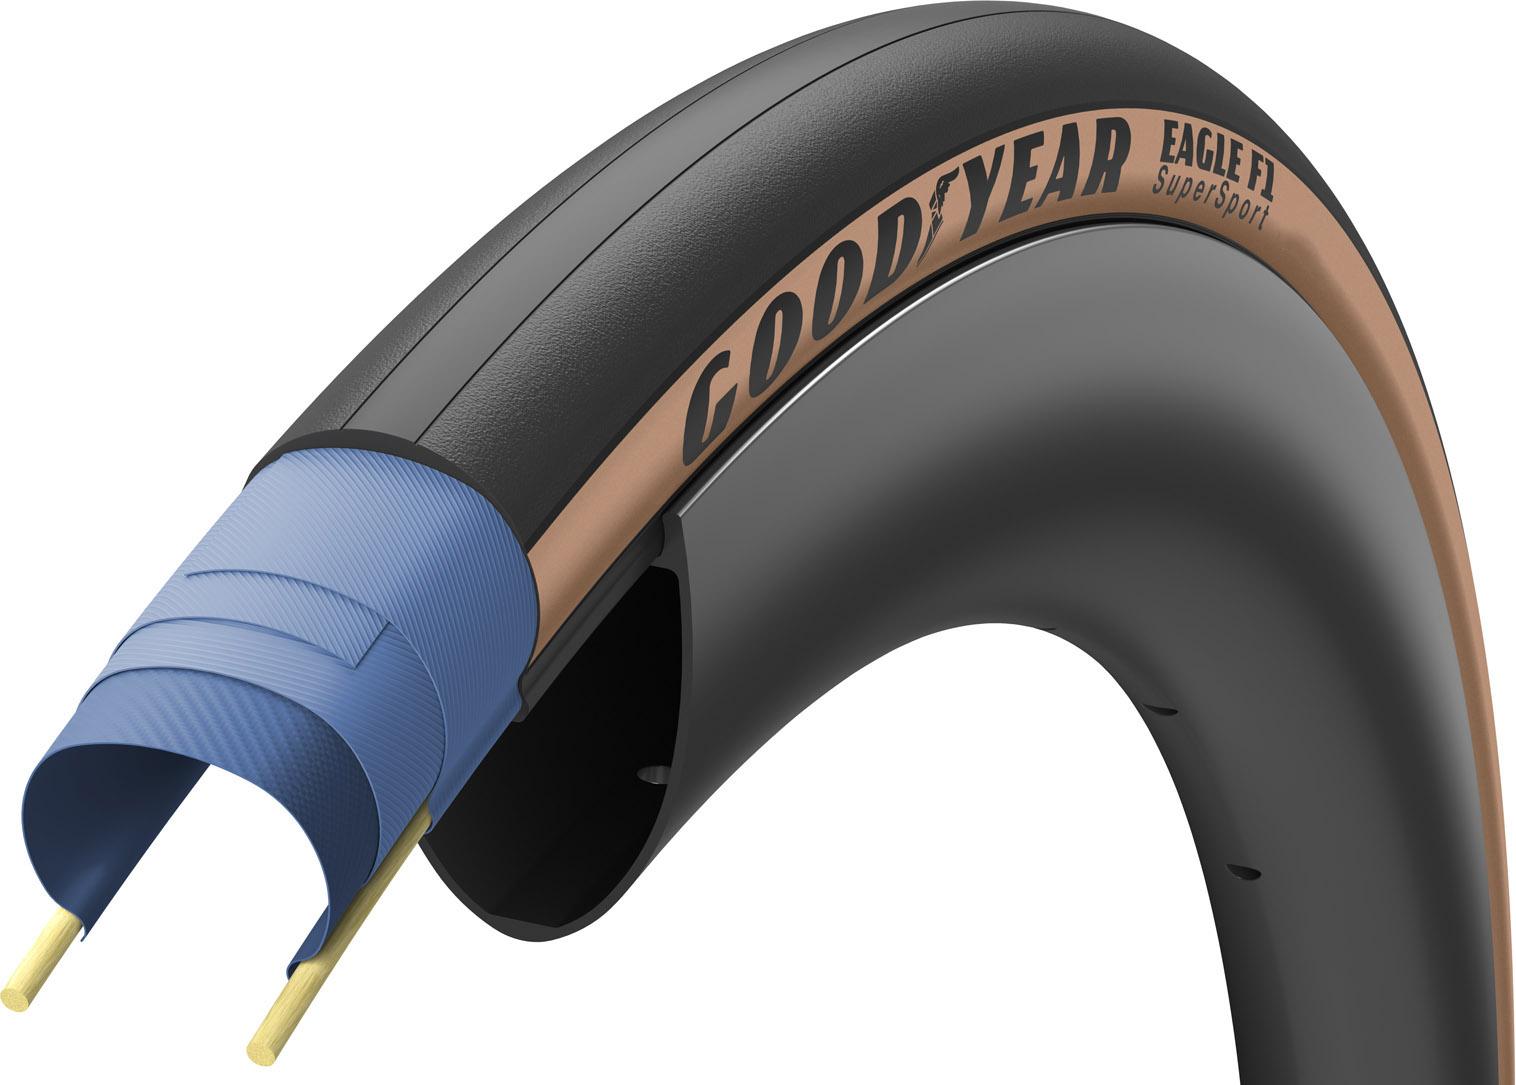 Goodyear Eagle F1 Supersport Road Tyre  Black/tan Wall